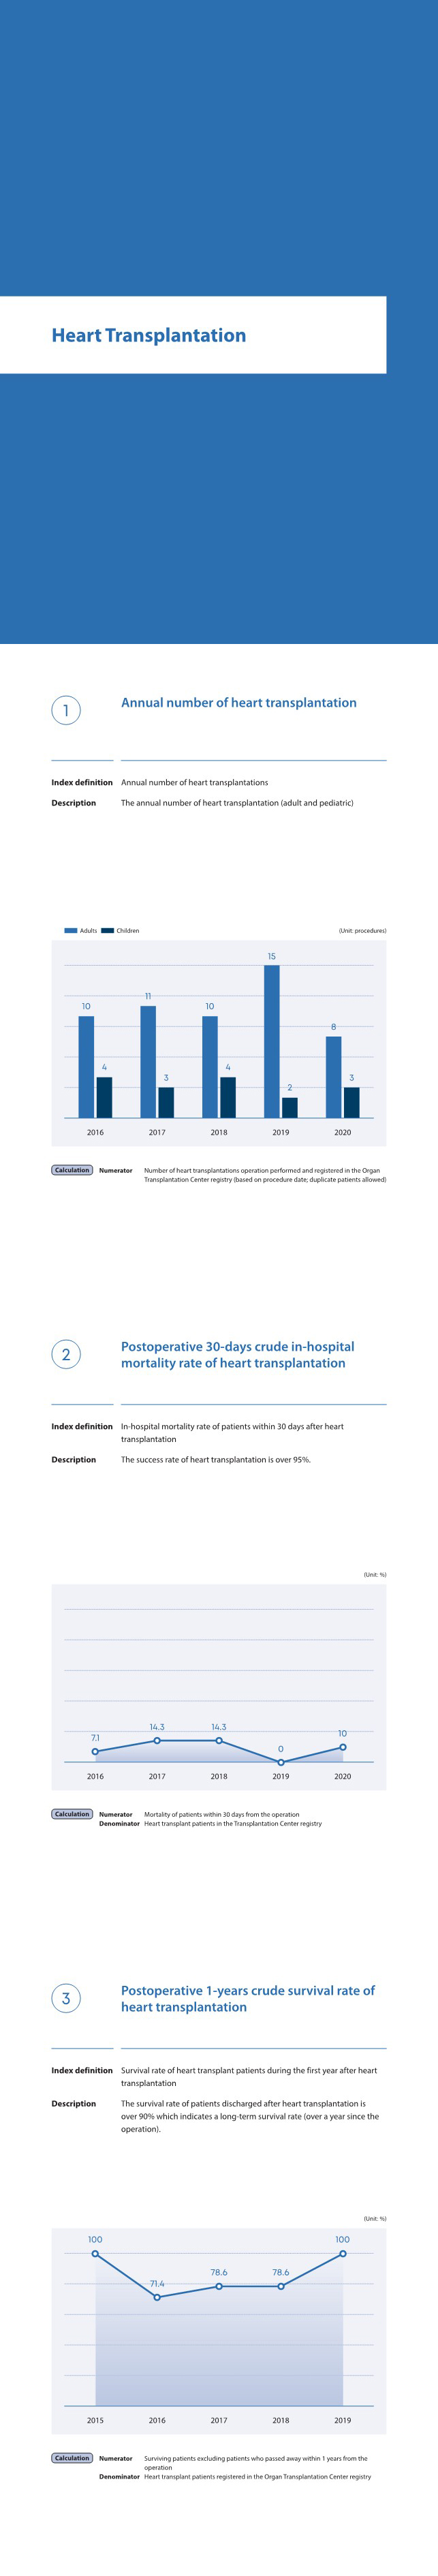 Heart Transplantation, Annual number of heart transplantations, The annual number of heart transplantation (adult and pediatric)